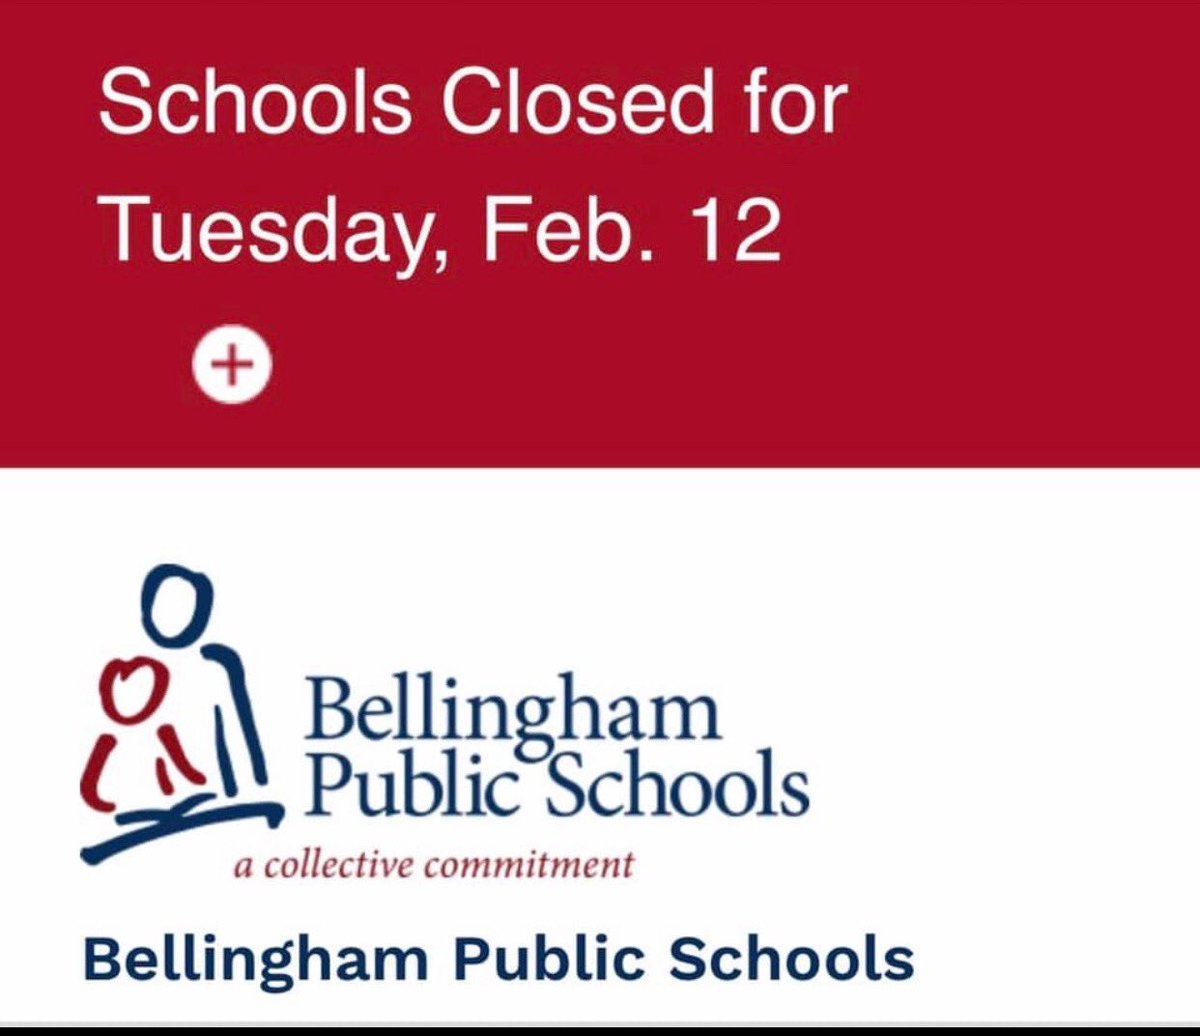 School is out for James tomorrow now too!! #BellinghamPS #SnowDay2